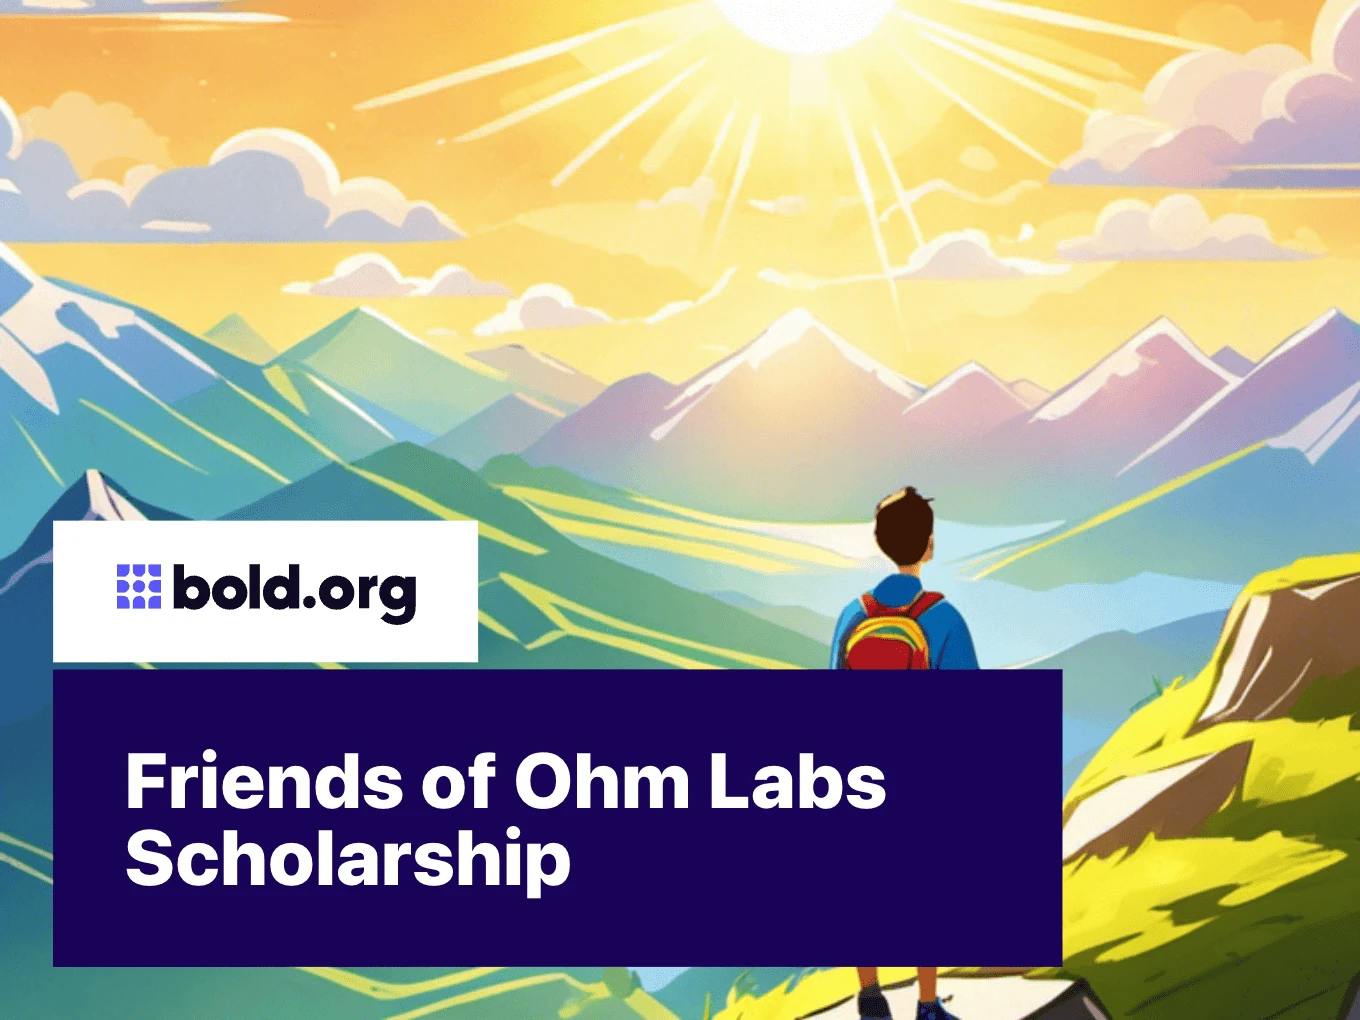 Friends of Ohm Labs Scholarship